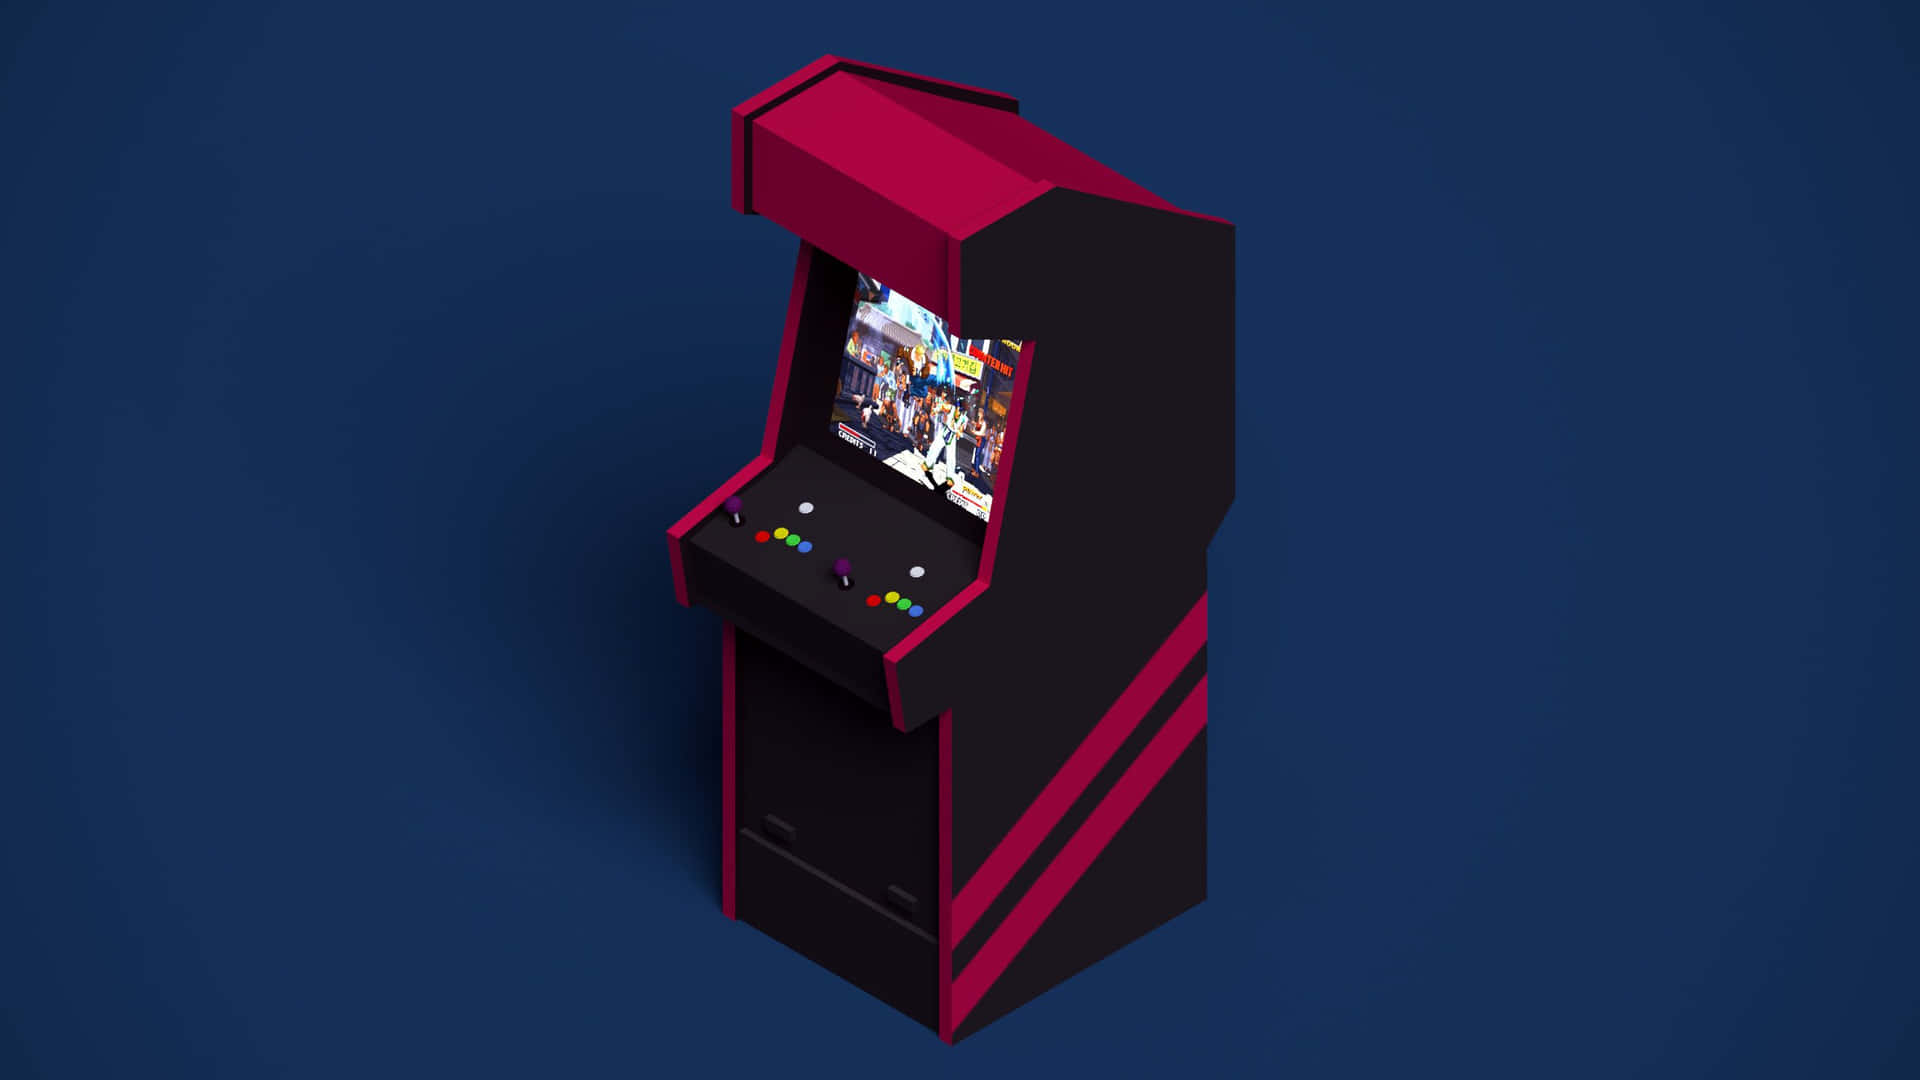 Dive into the retro gaming universe of arcade aesthetic Wallpaper